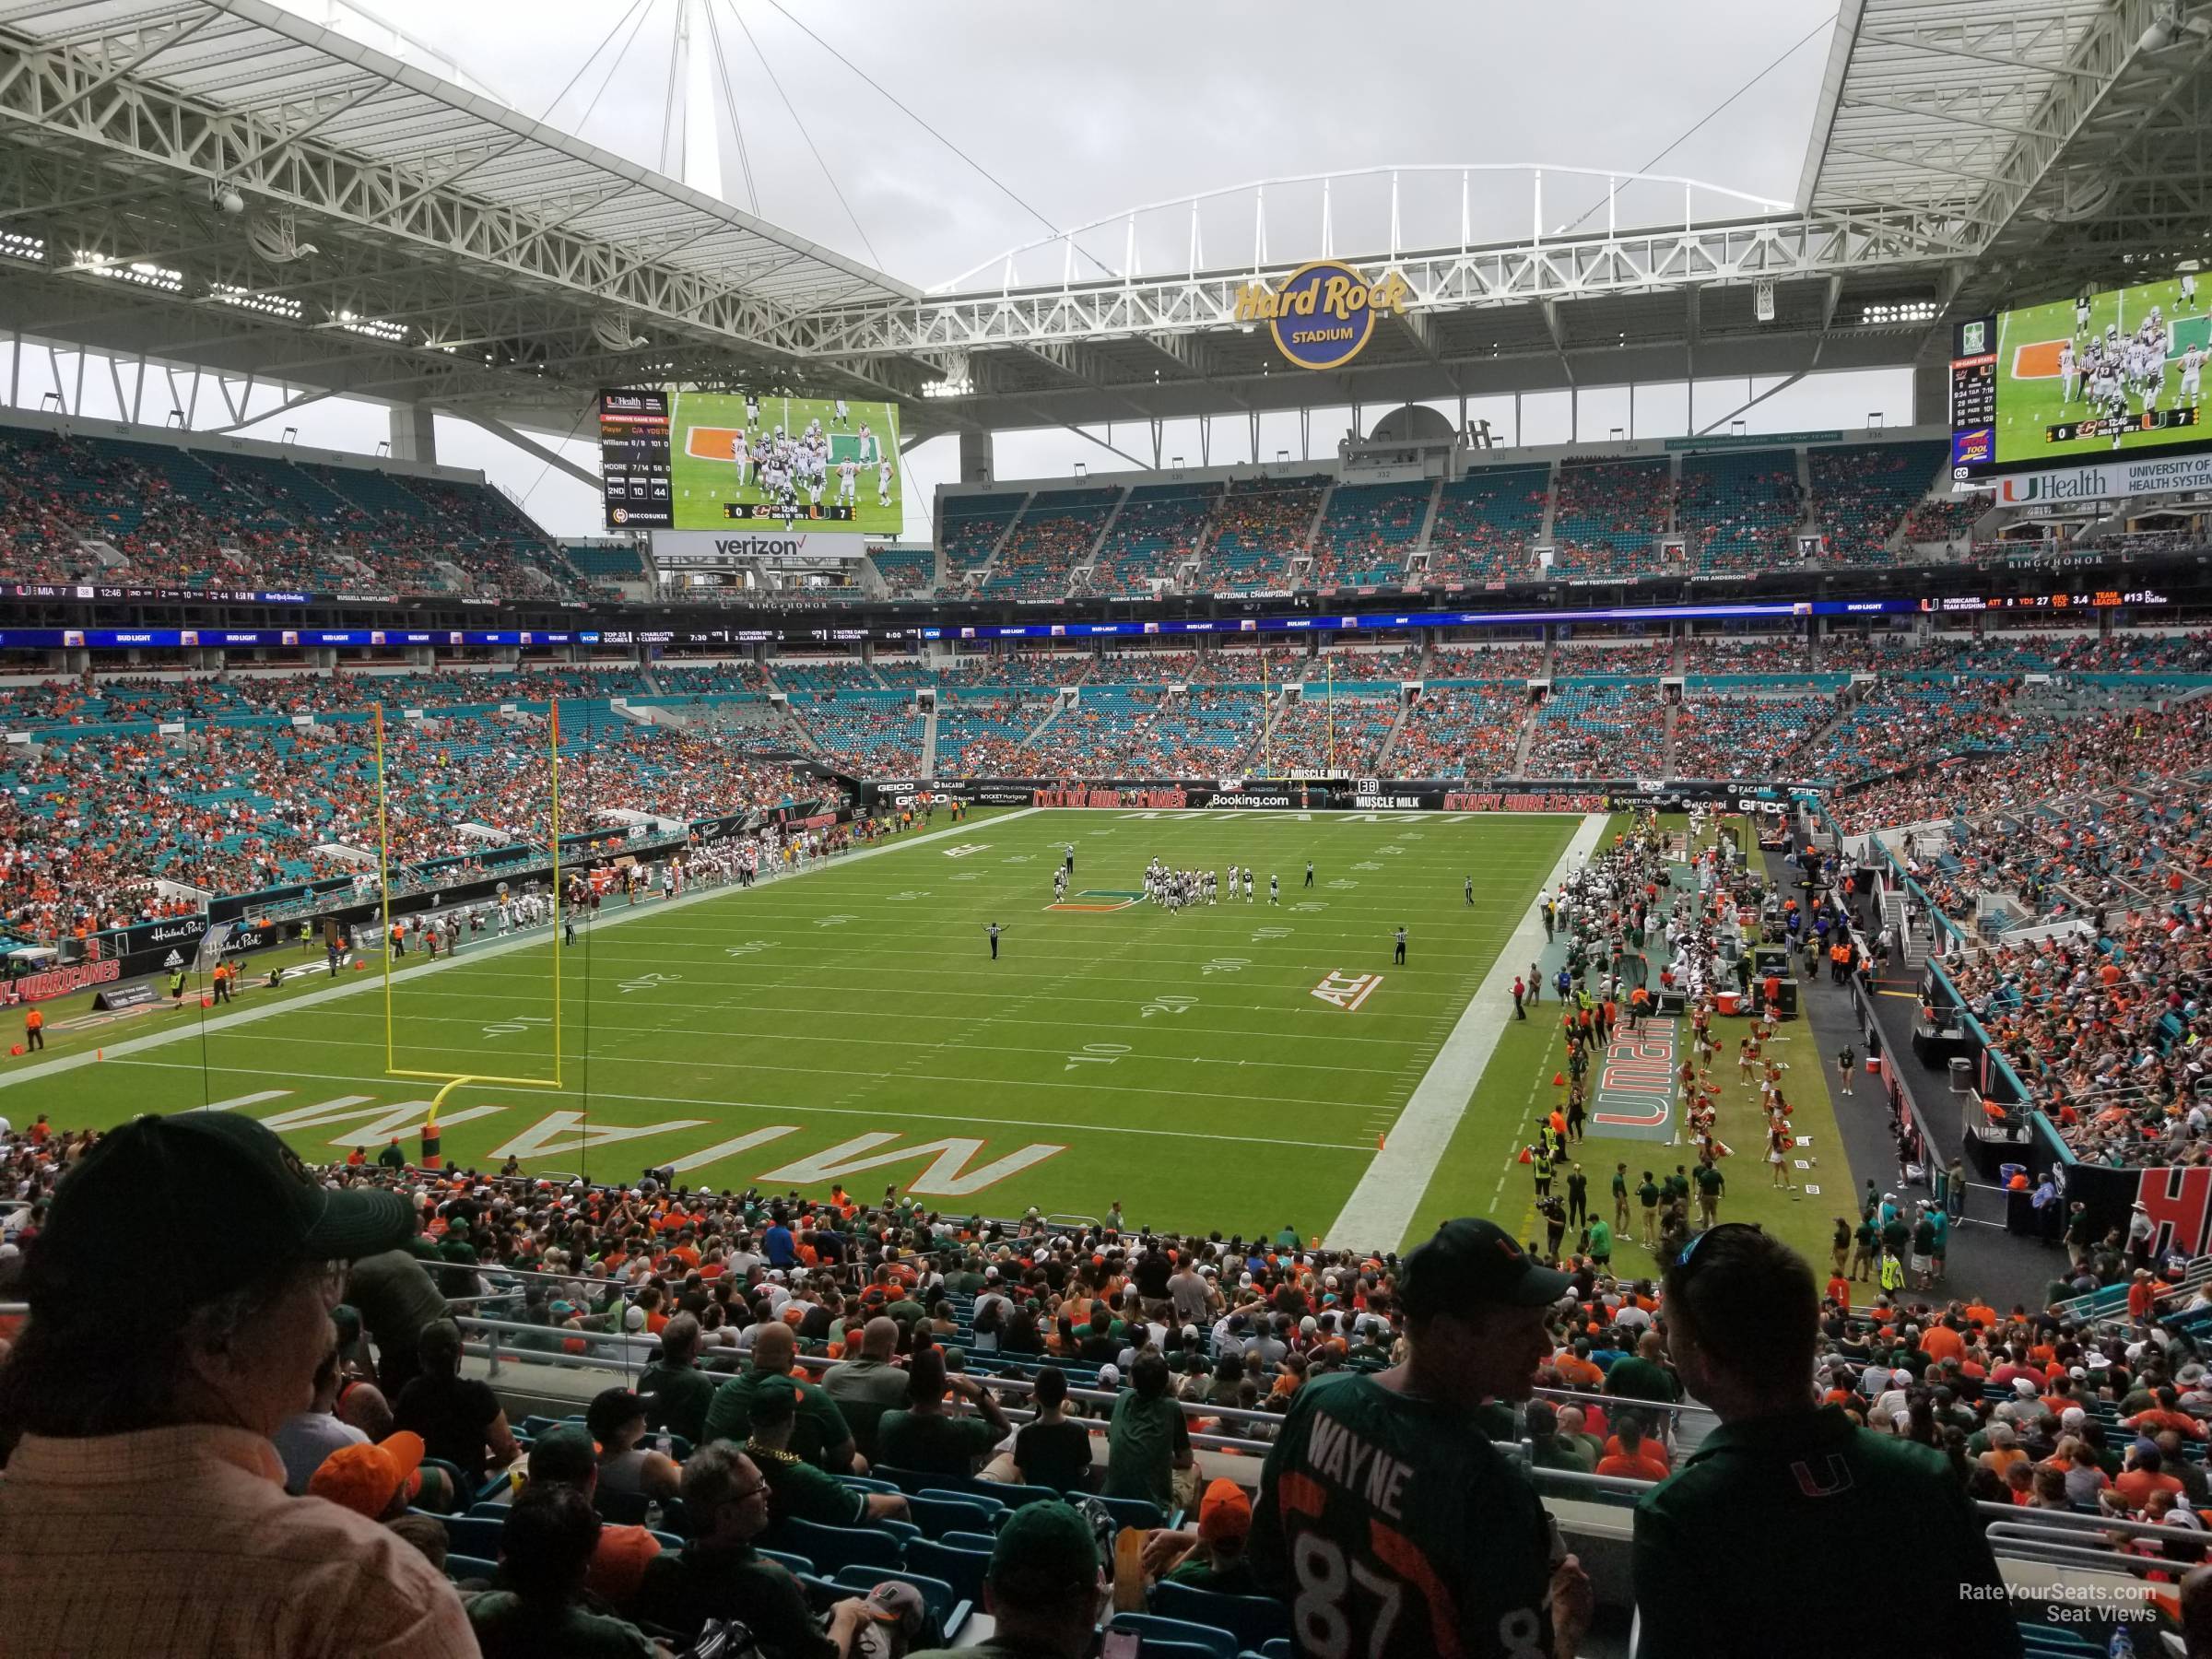 section 202, row 10 seat view  for football - hard rock stadium